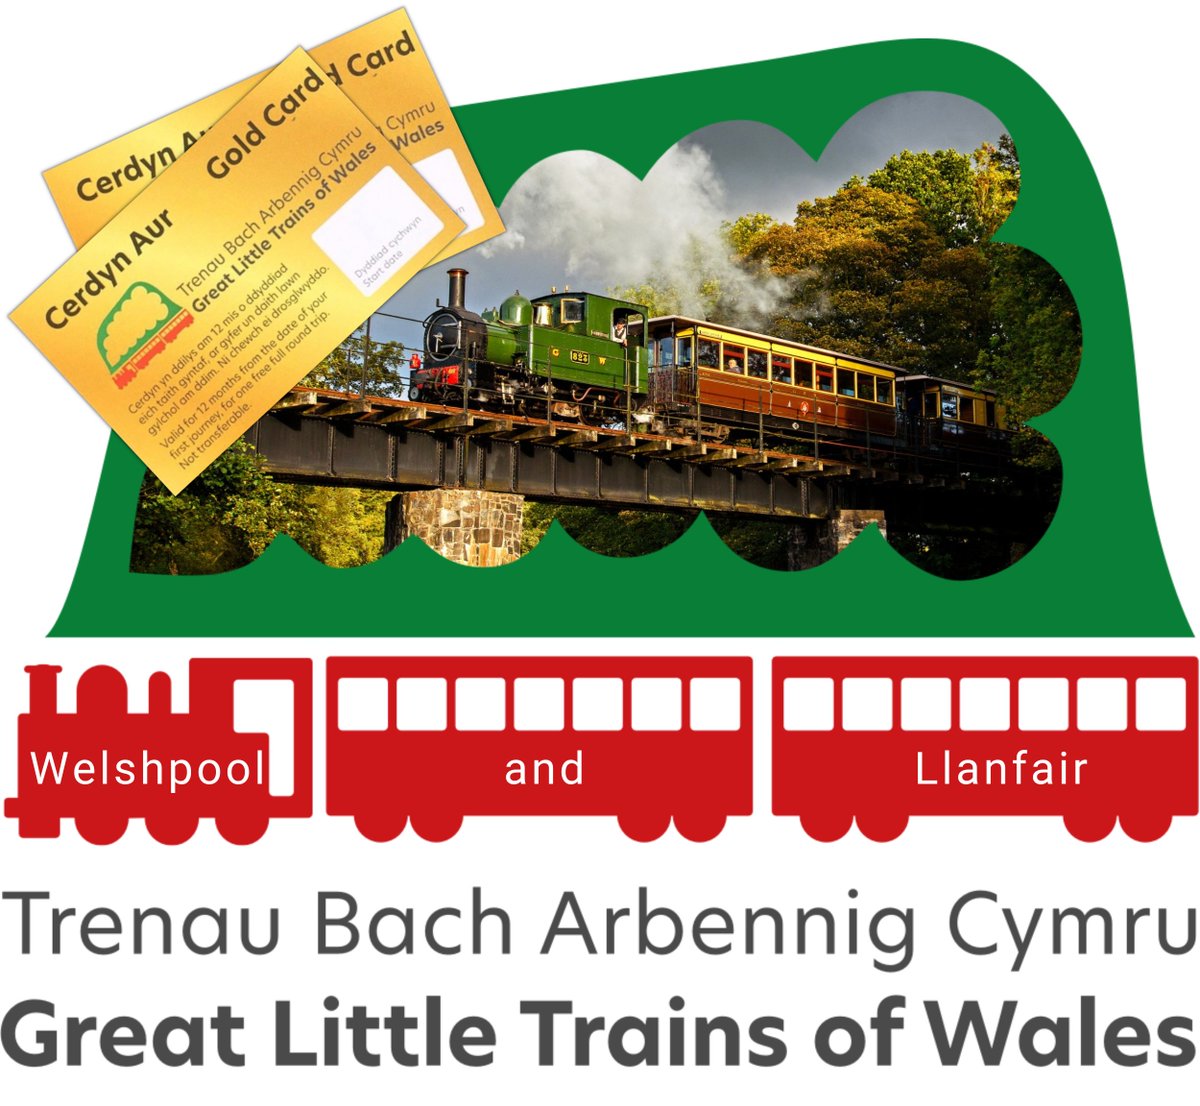 🎟️ Gold Card offer £23 offer now 11 magnificent railways on 1 card! 🚂 Take your time as we transport you on a relaxed journey, an ideal little adventure. #goldcard £152 till 23/04 🔗 loom.ly/oE8uHOs 📸 @LlanfairLine #23offGOLDCARDfor23days2023 #WelshpoolSteamRailway